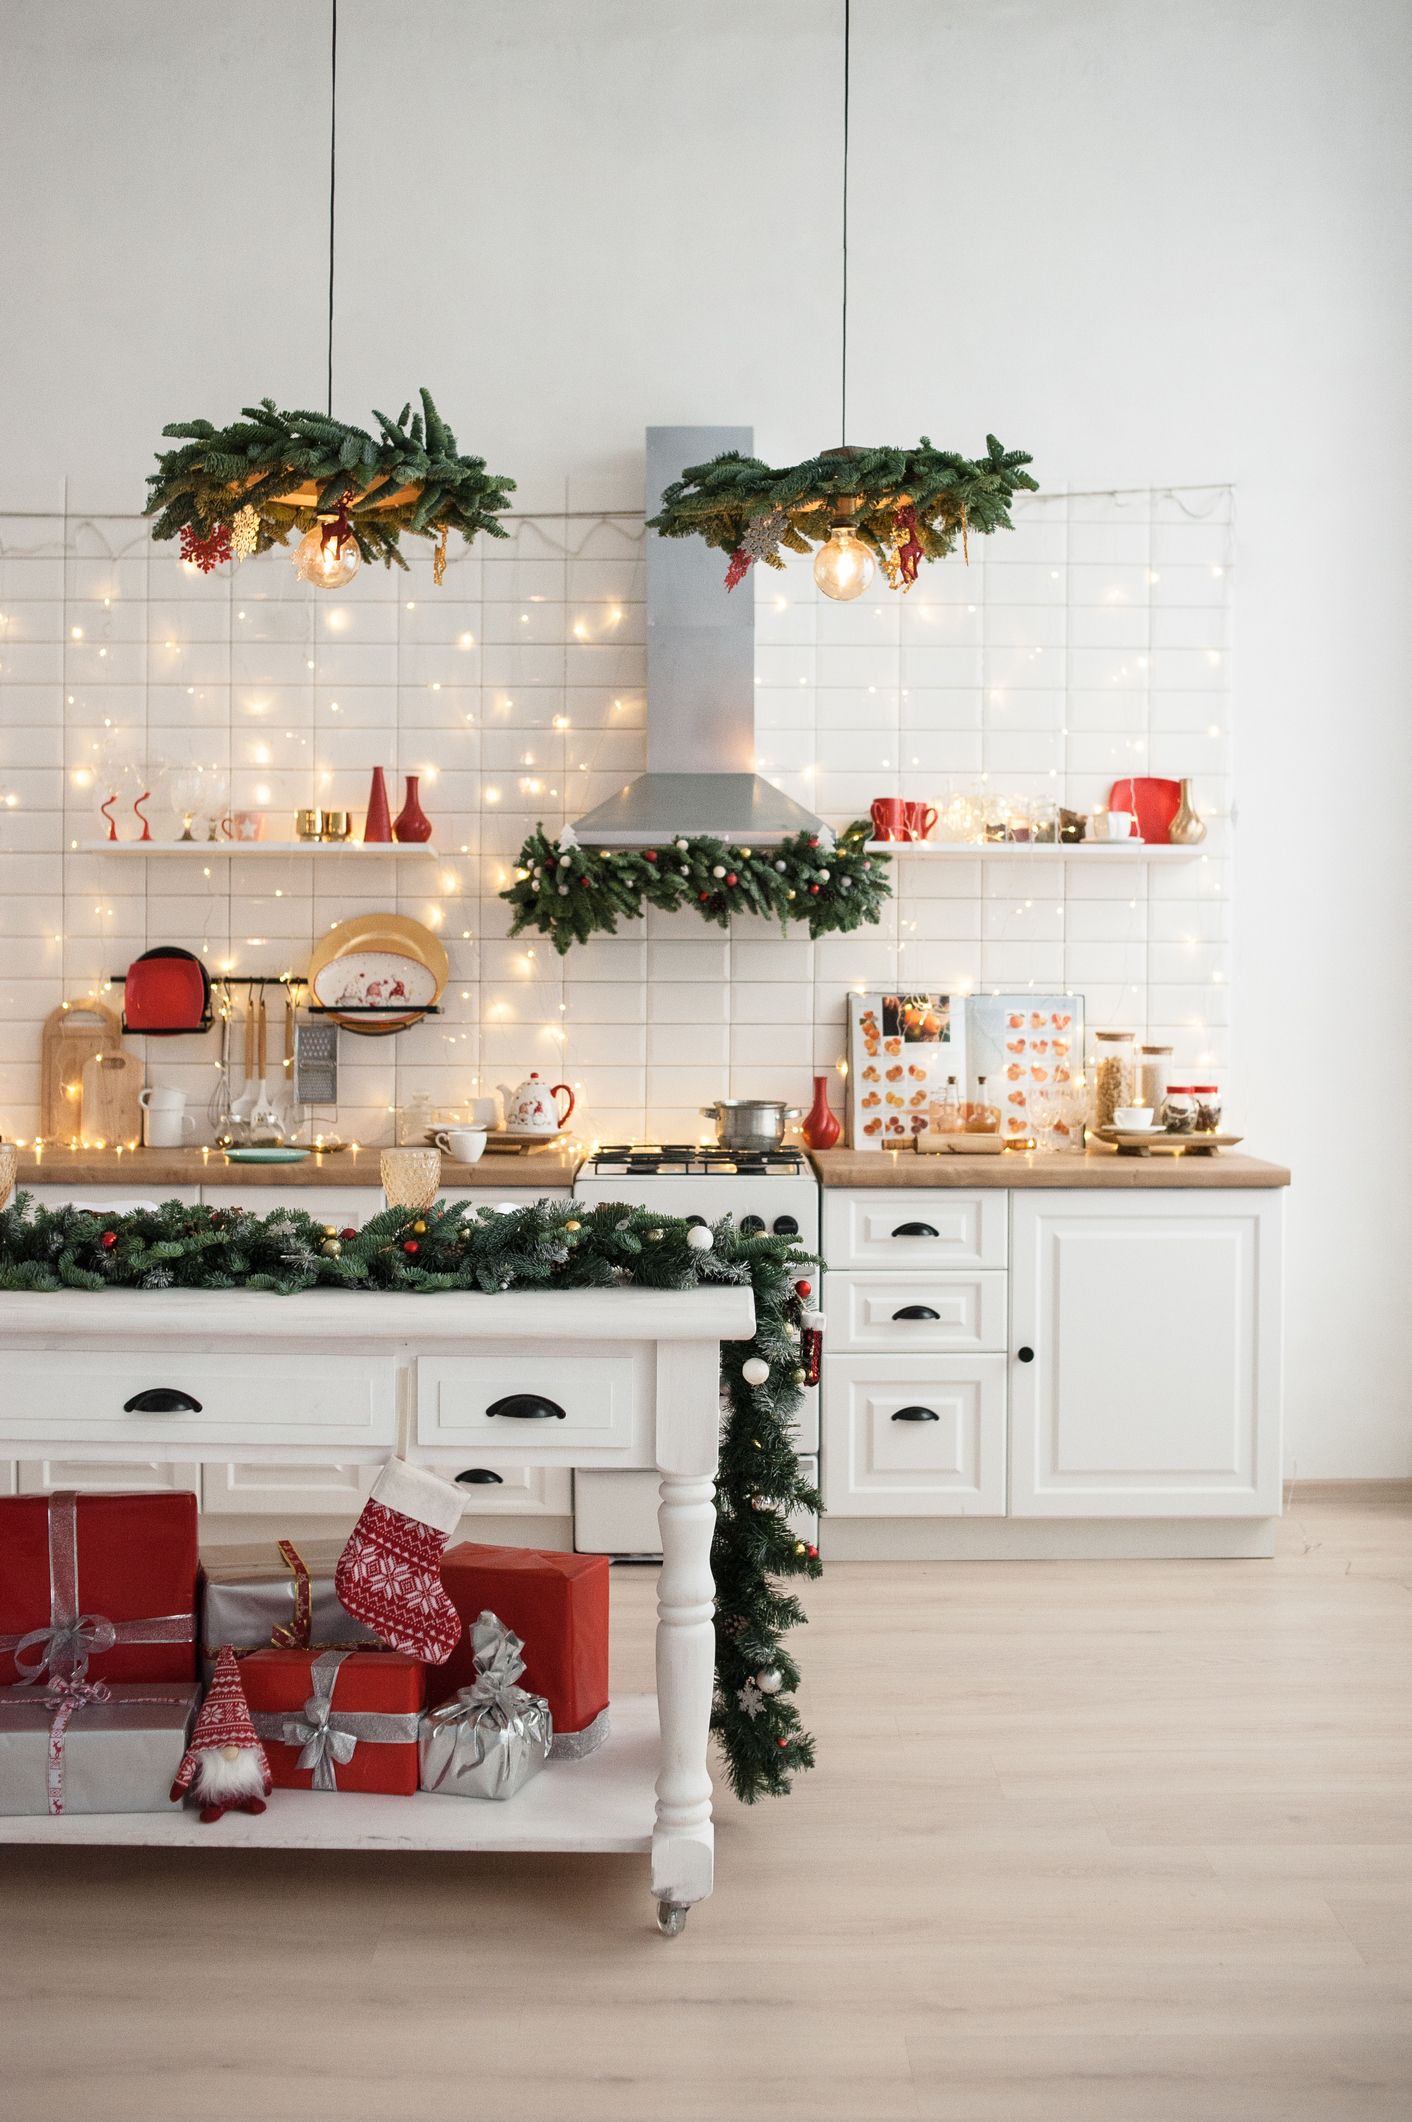 https://hips.hearstapps.com/hmg-prod/images/white-kitchen-interior-with-classic-christmas-decor-royalty-free-image-1699041735.jpg